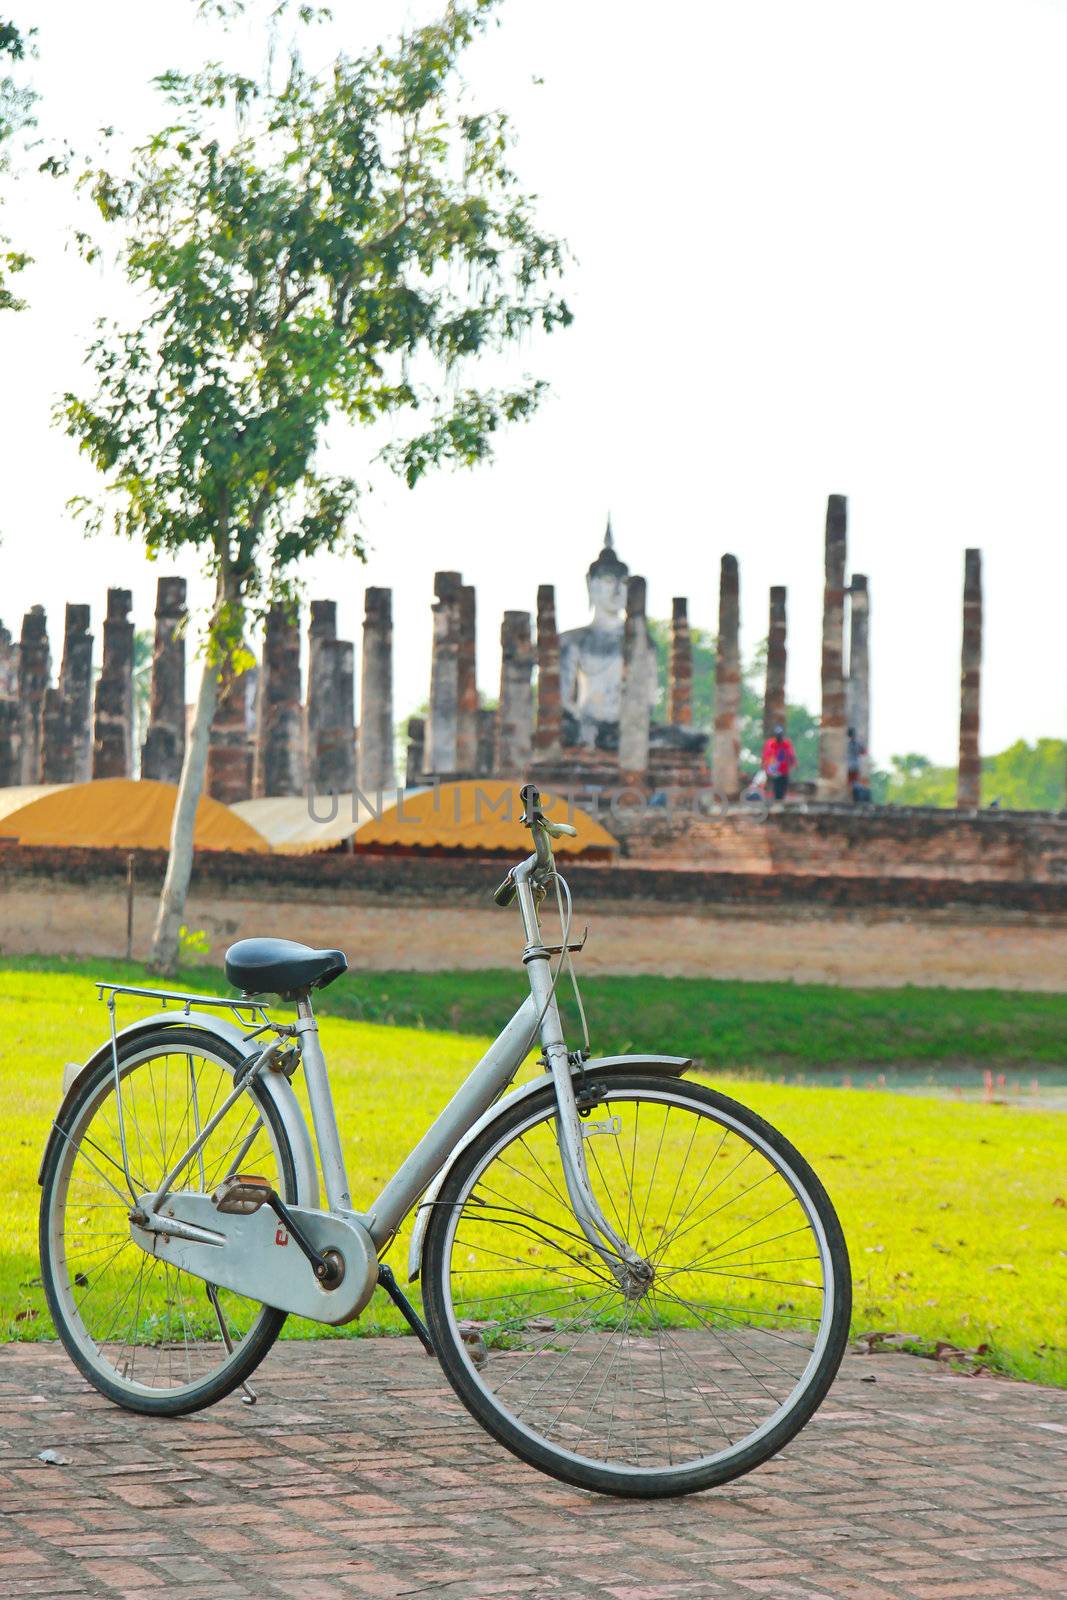 A bicycle in Sukhothai historical park, Thailand by nuchylee